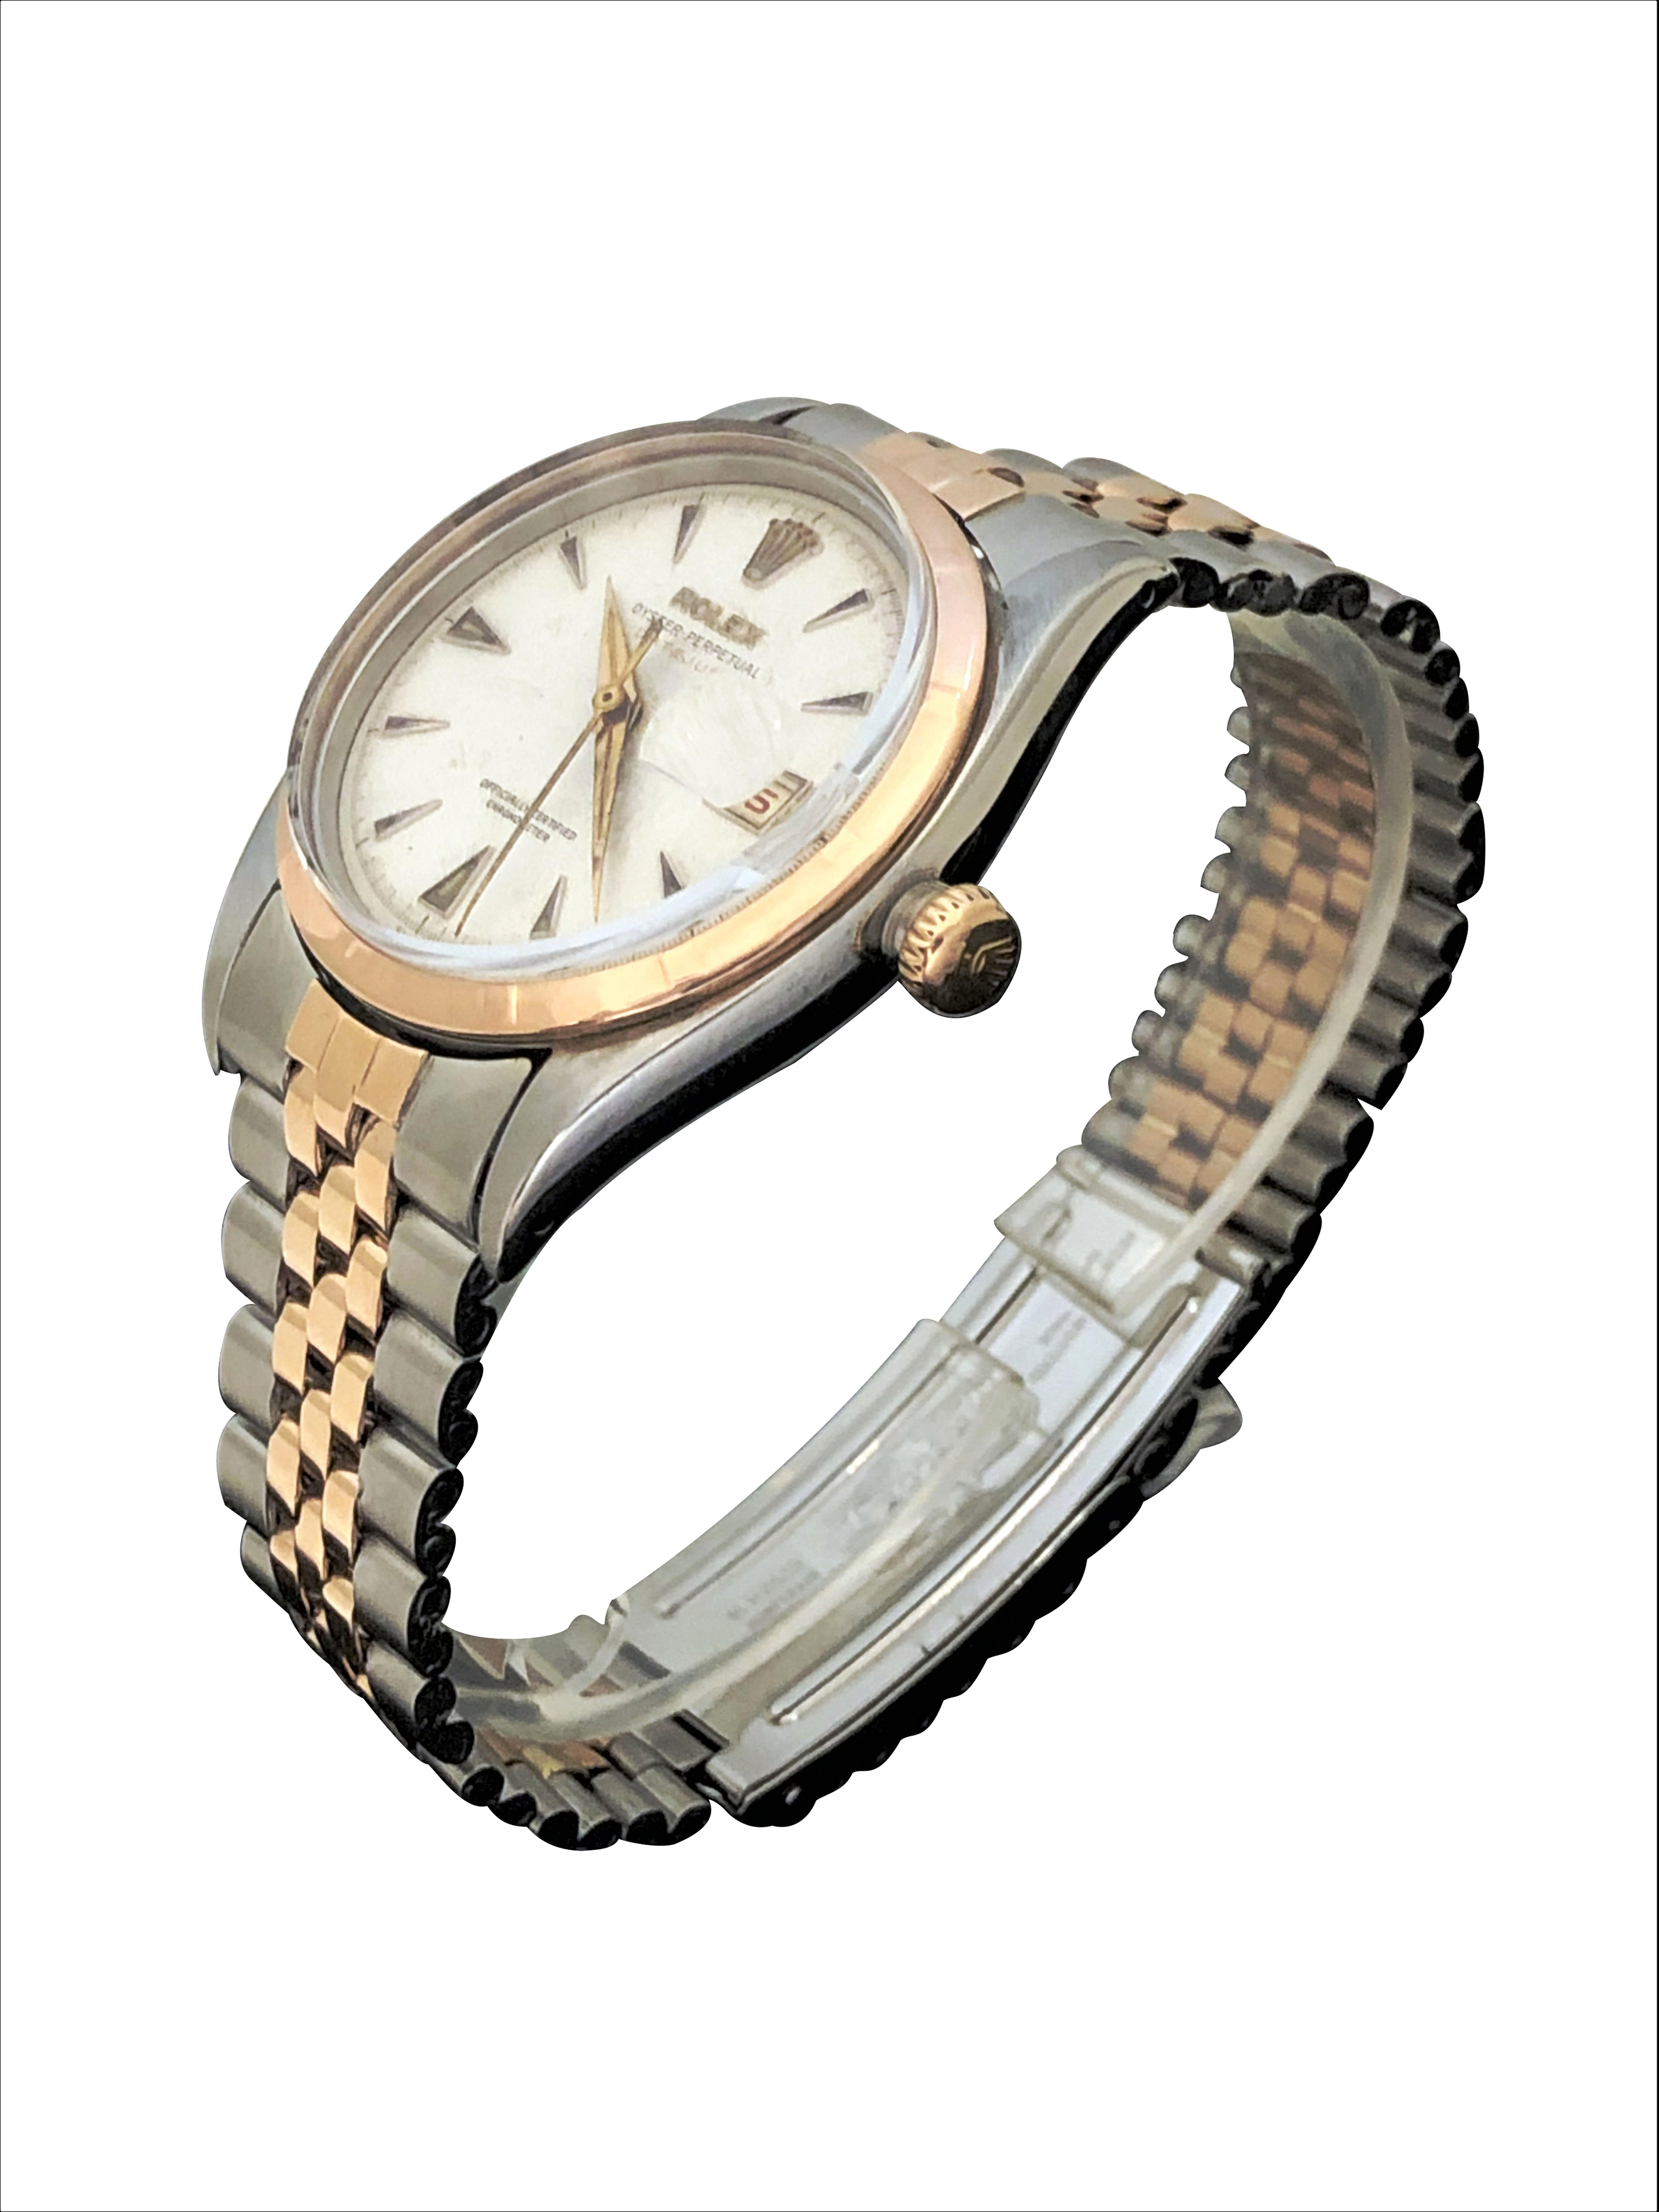 Circa 1954 Rolex Oyster perpetual Reference 6305  